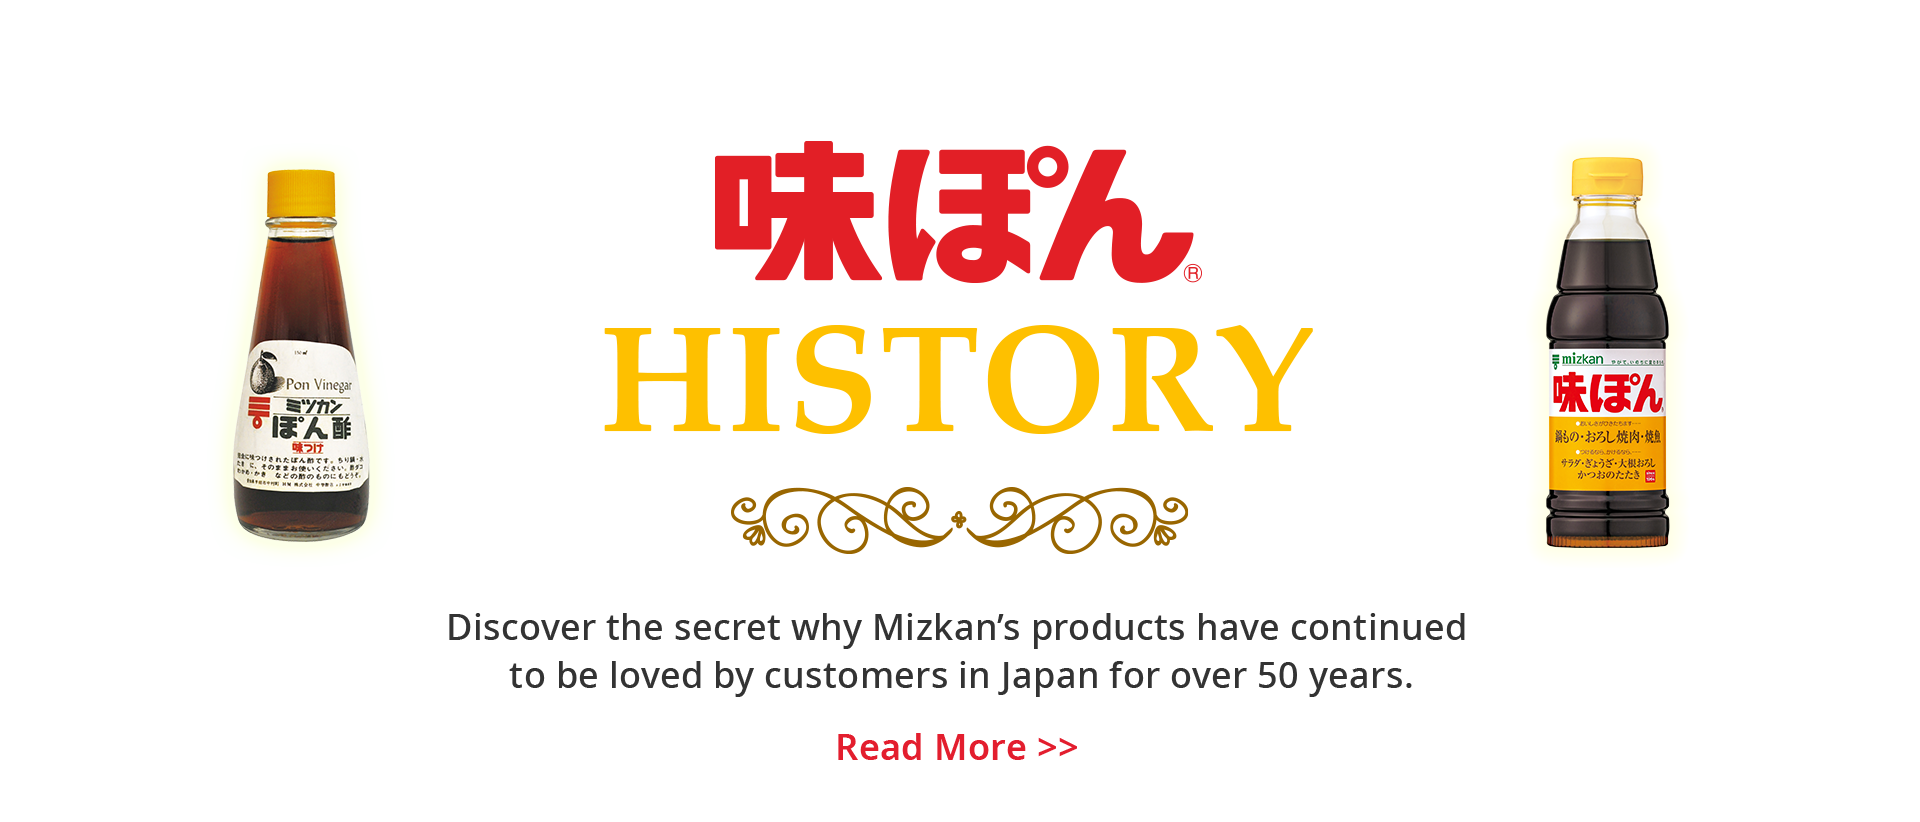 History of AJIPON - Discover the secret why Mizkan's products have continued to be loved by customers in Japan for over 50 years.